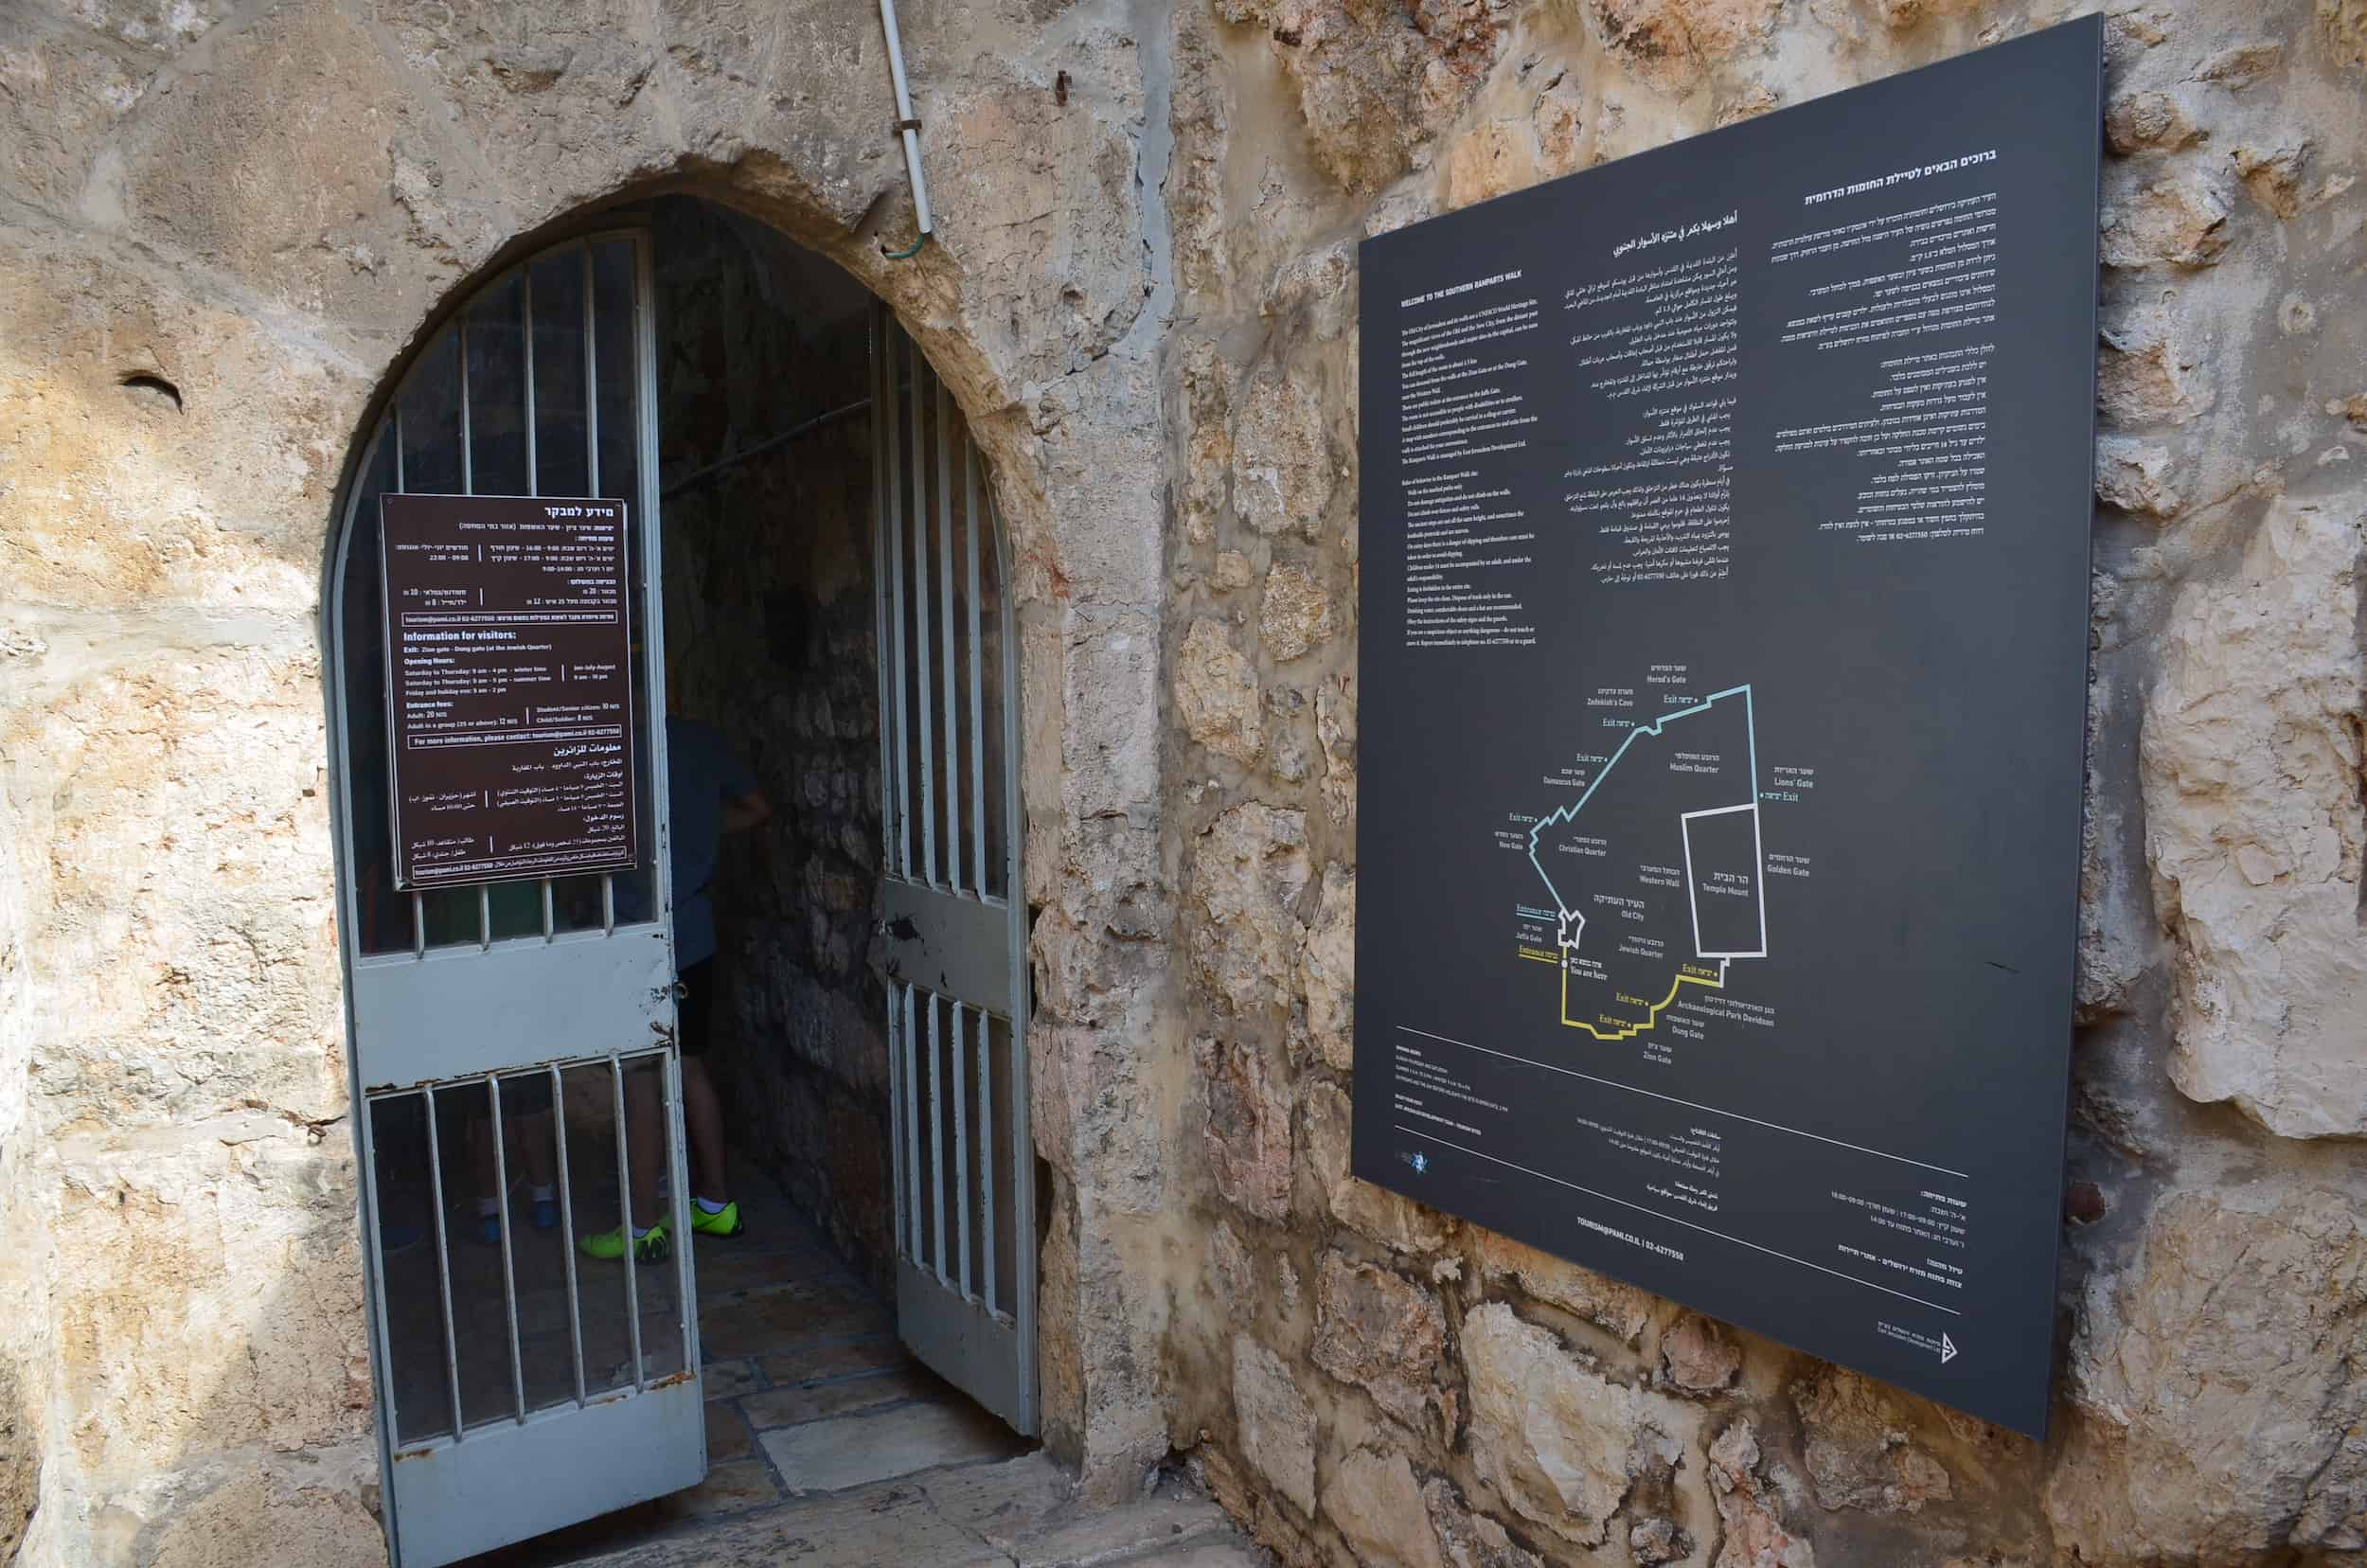 Entrance to the southern route of the Ramparts Walk in Jerusalem